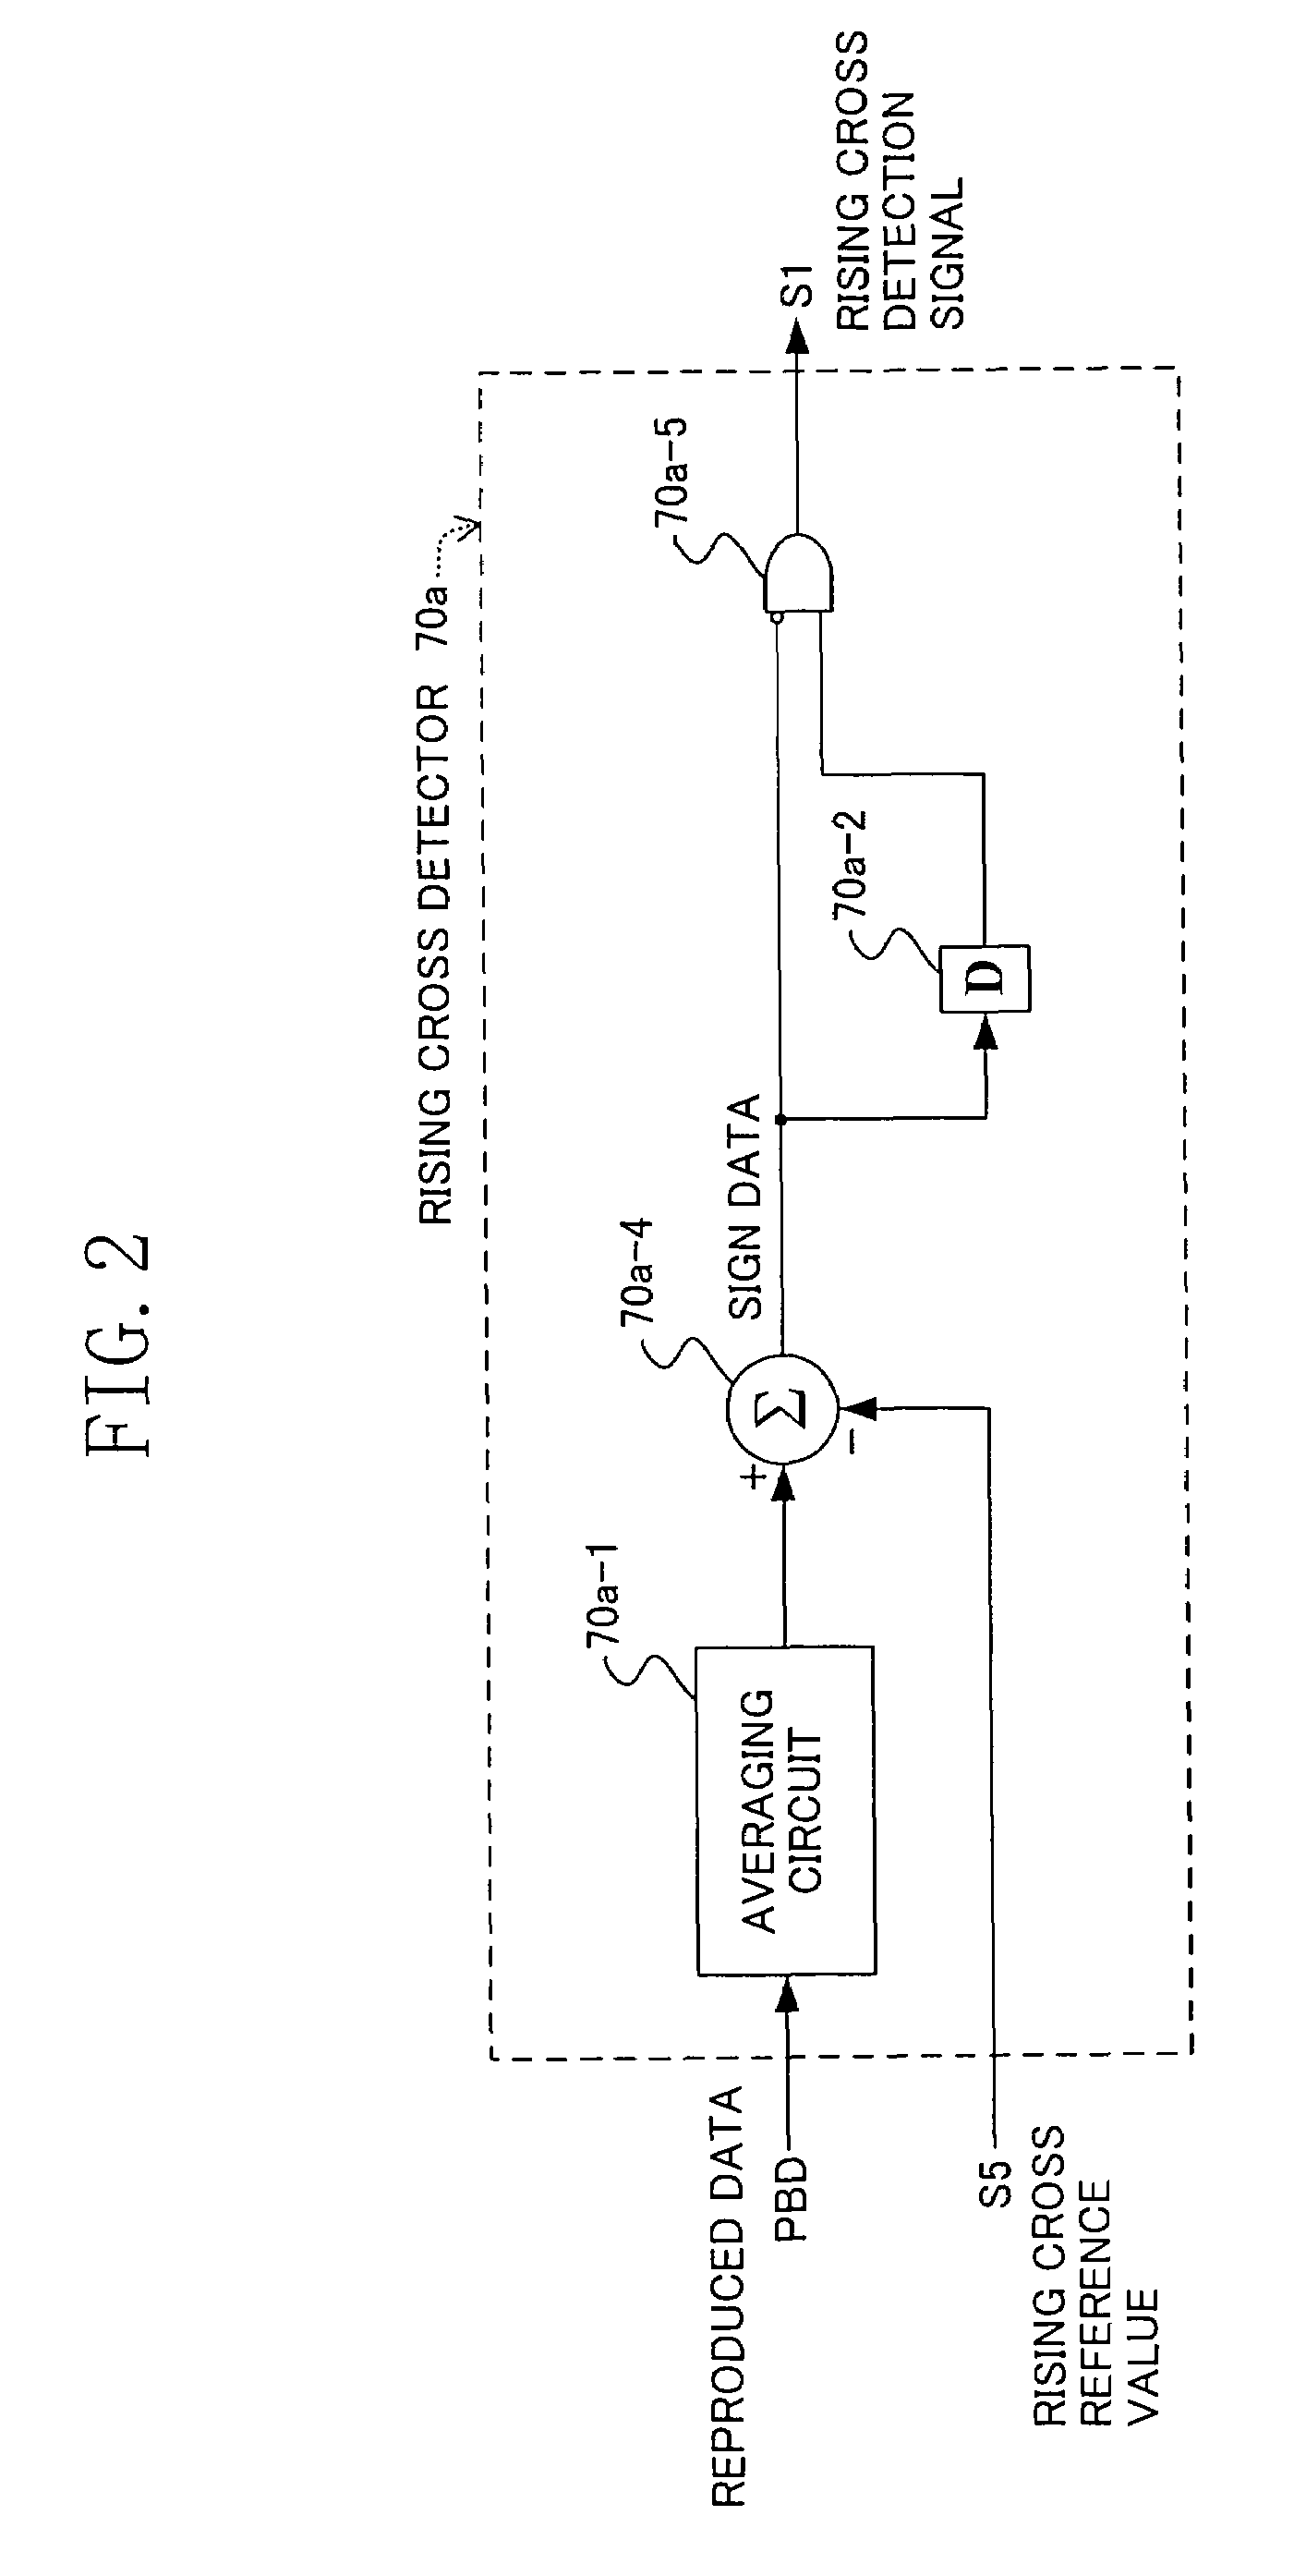 Phase error detecting circuit and synchronization clock extraction circuit